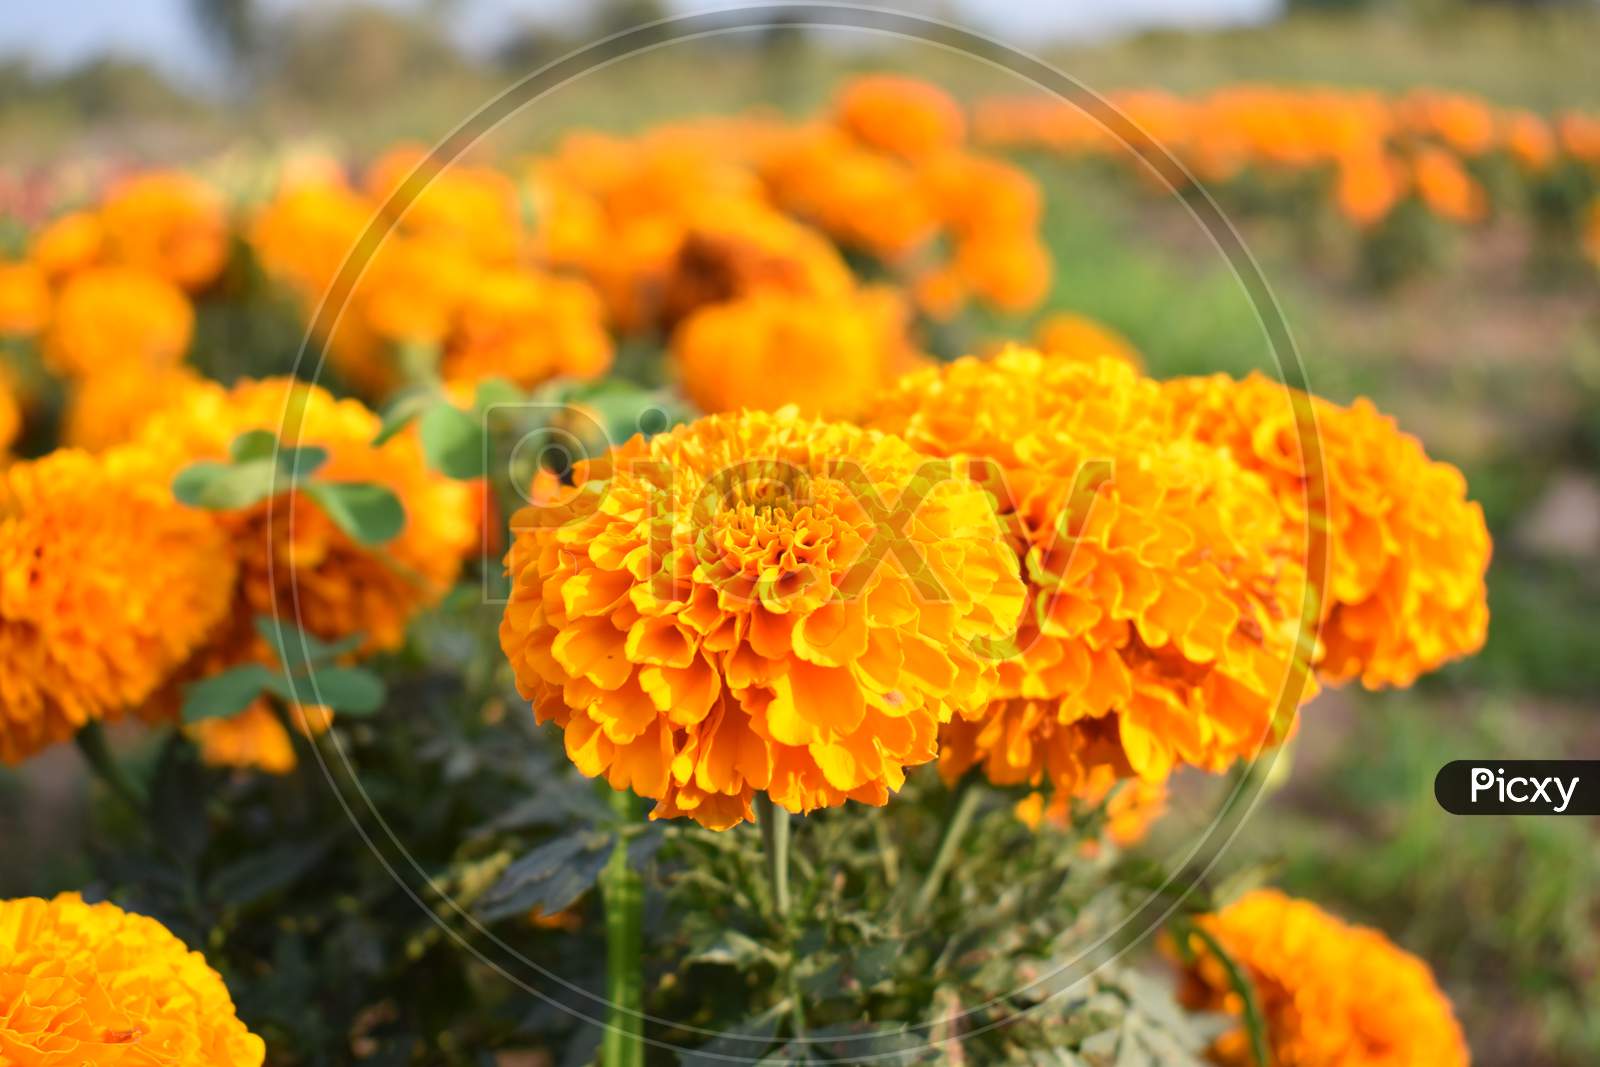 Marigold flowers are blooming in the cultivation field